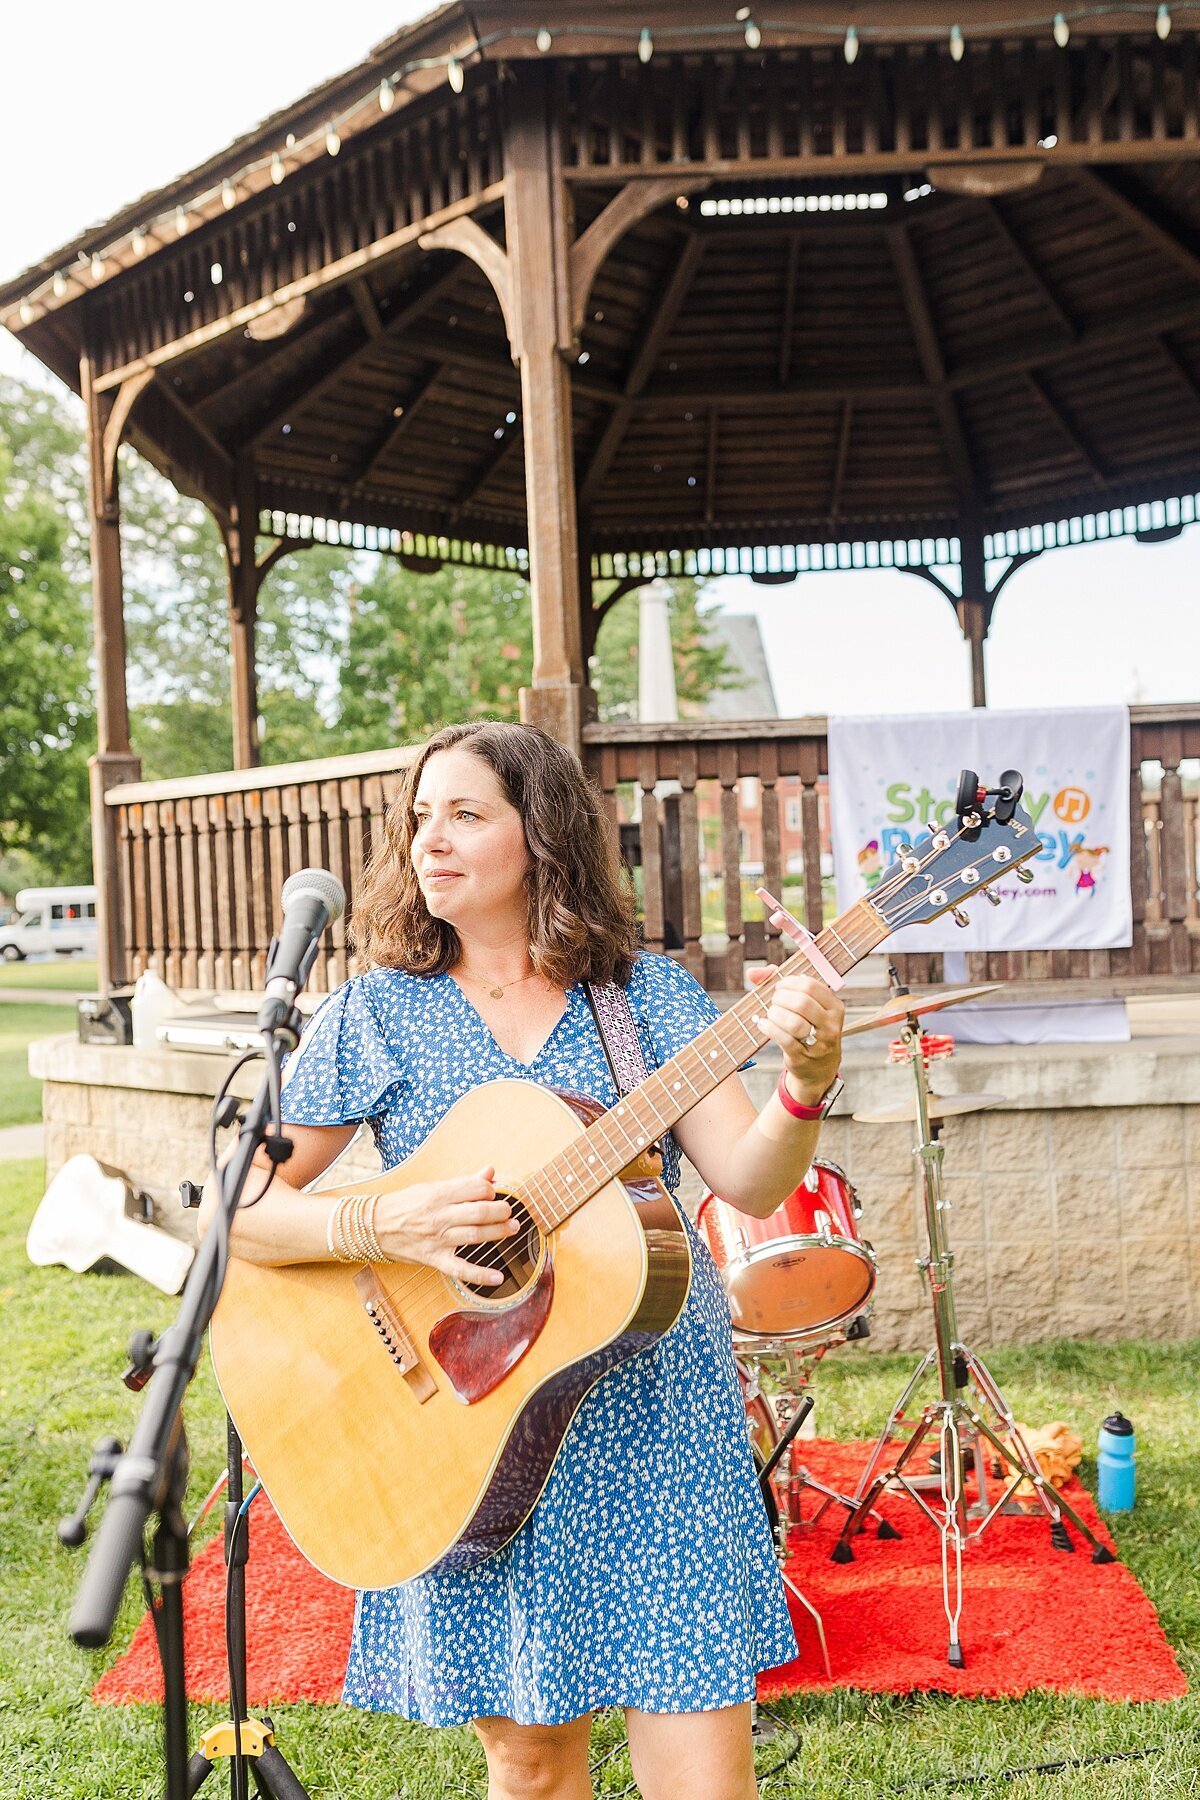 Stacey Peasley sings during Stacey Peasley Band Branding photo session with Sara Sniderman Photography in Natick Massachusetts